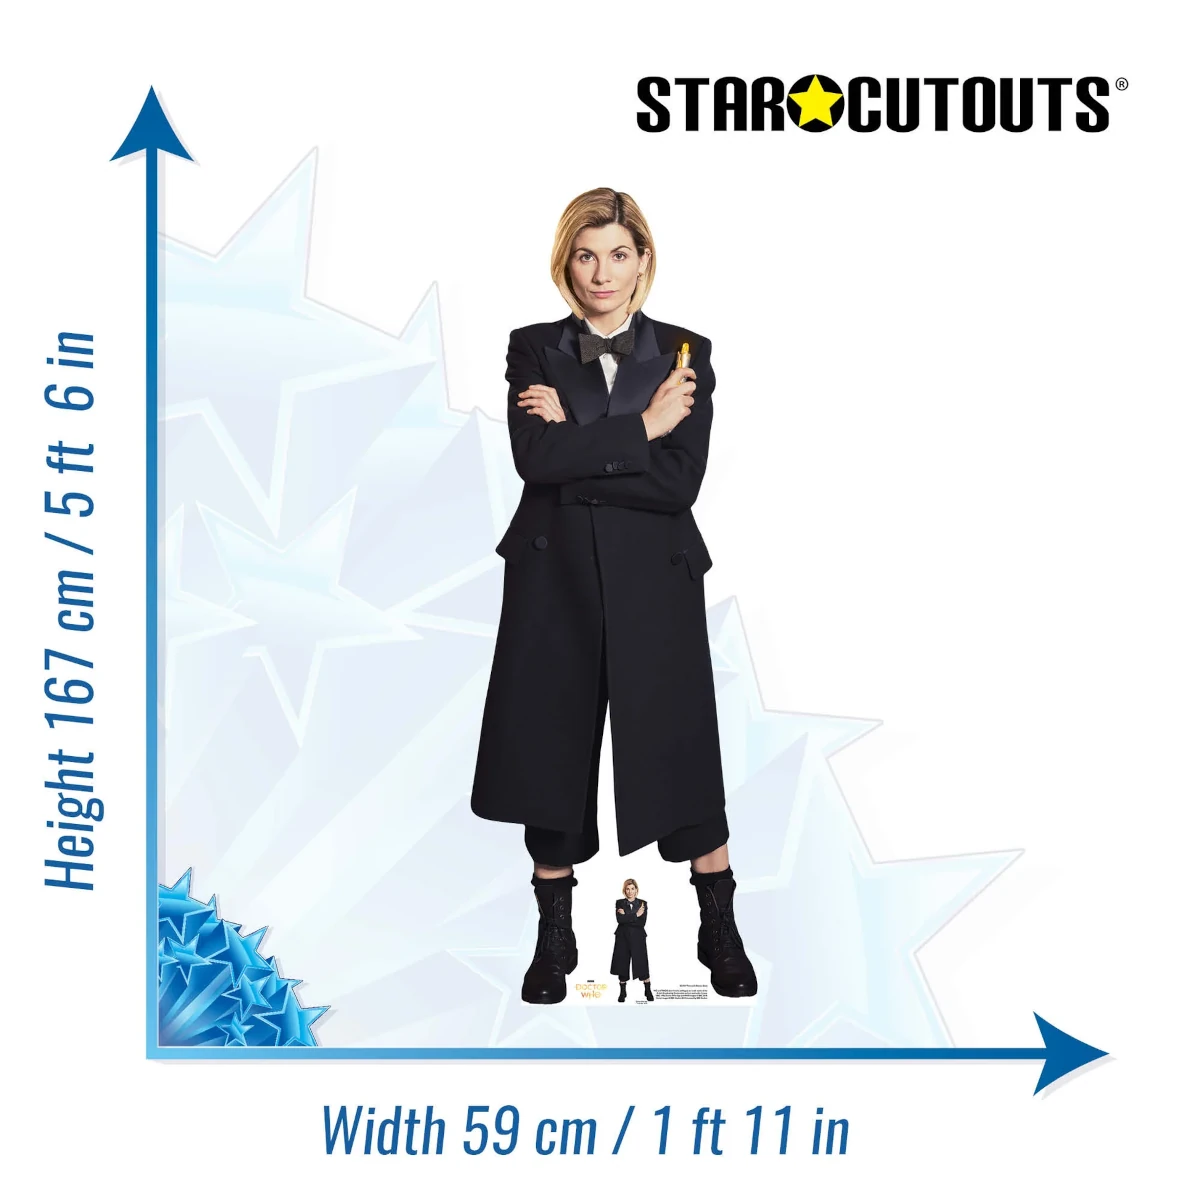 SC1517 The Thirteenth Doctor 'Jodie Whittaker' (Doctor Who) Lifesize + Mini Cardboard Cutout Standee Size